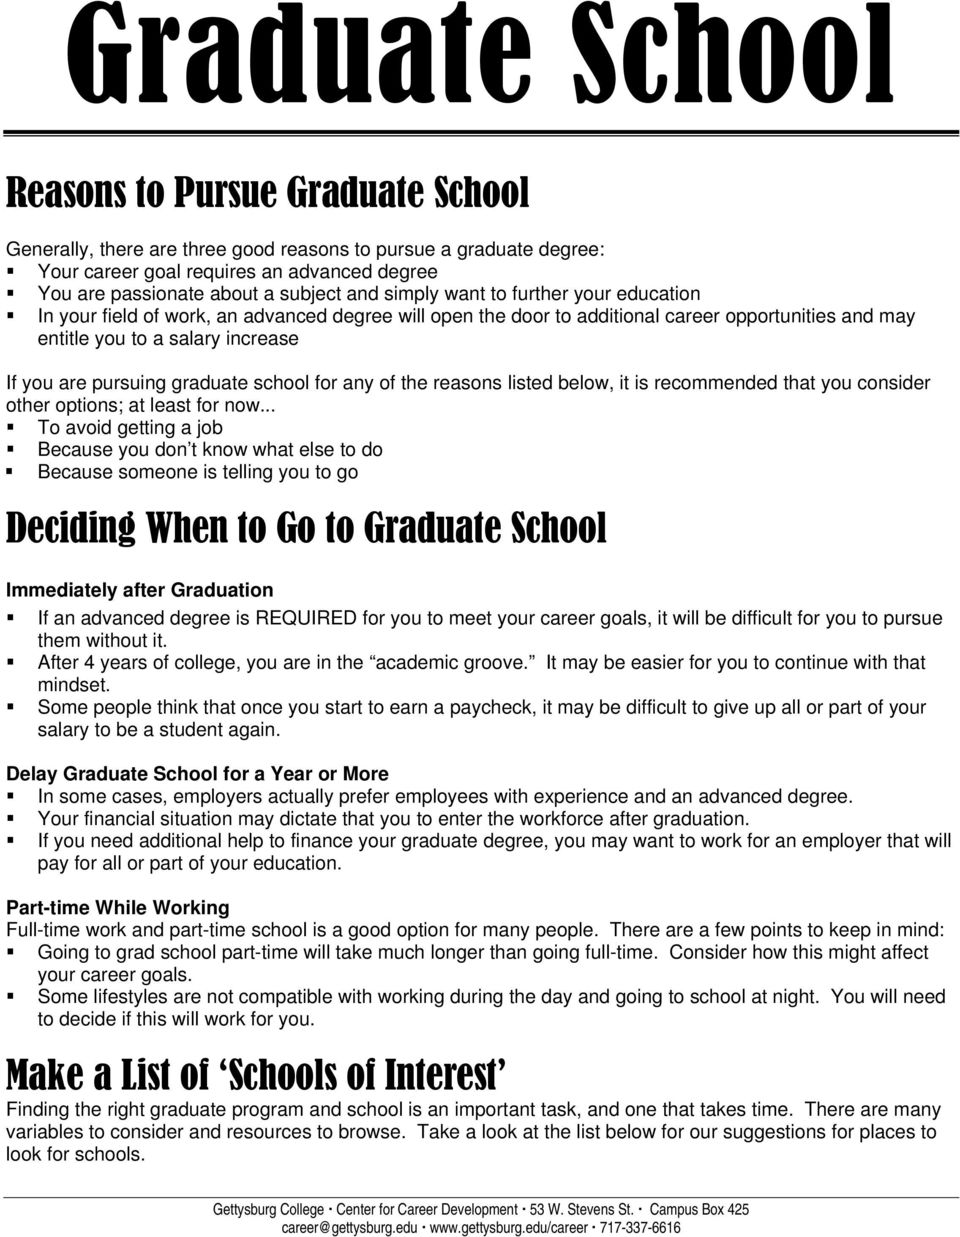 graduate school for any of the reasons listed below, it is recommended that you consider other options; at least for now.